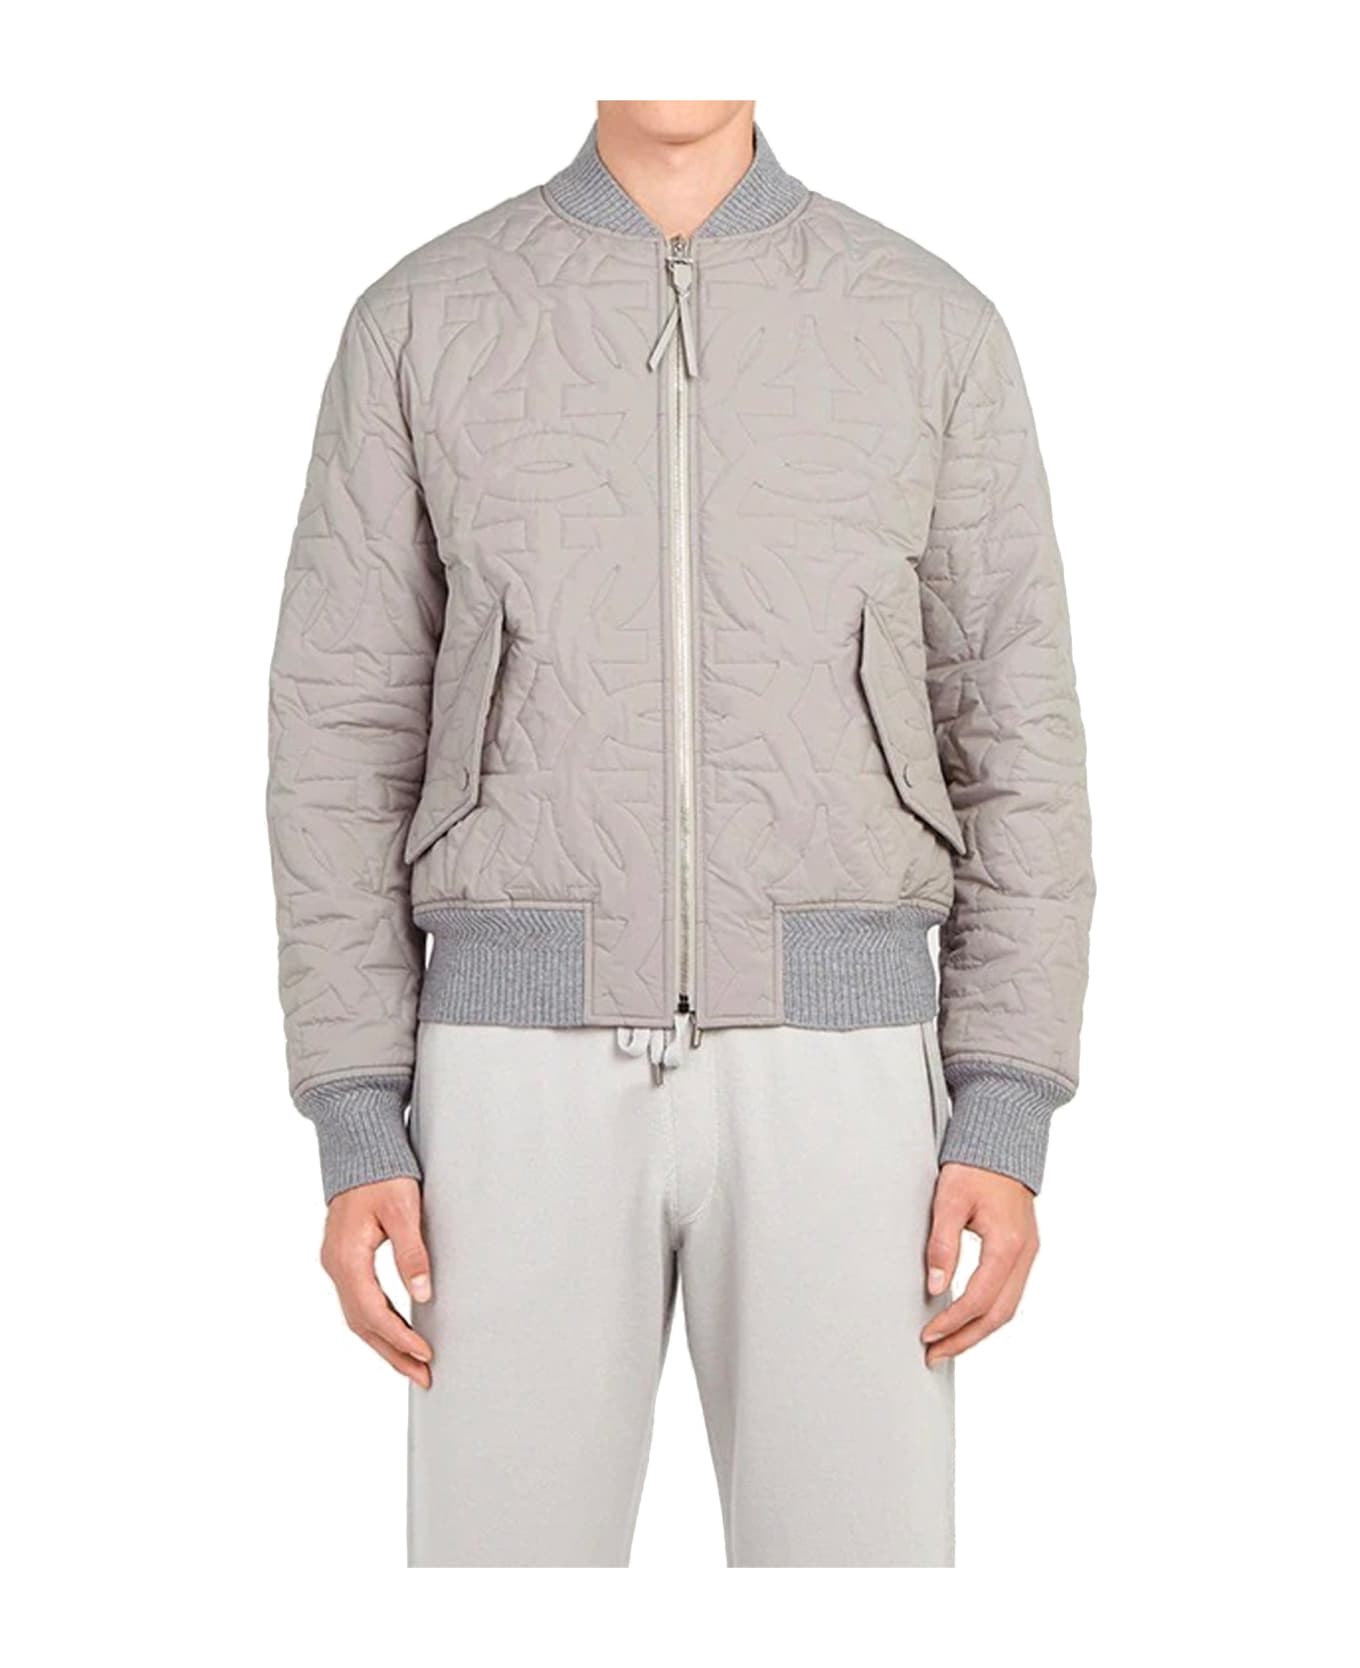 Ferragamo Quilted Bomber Jacket - Gray